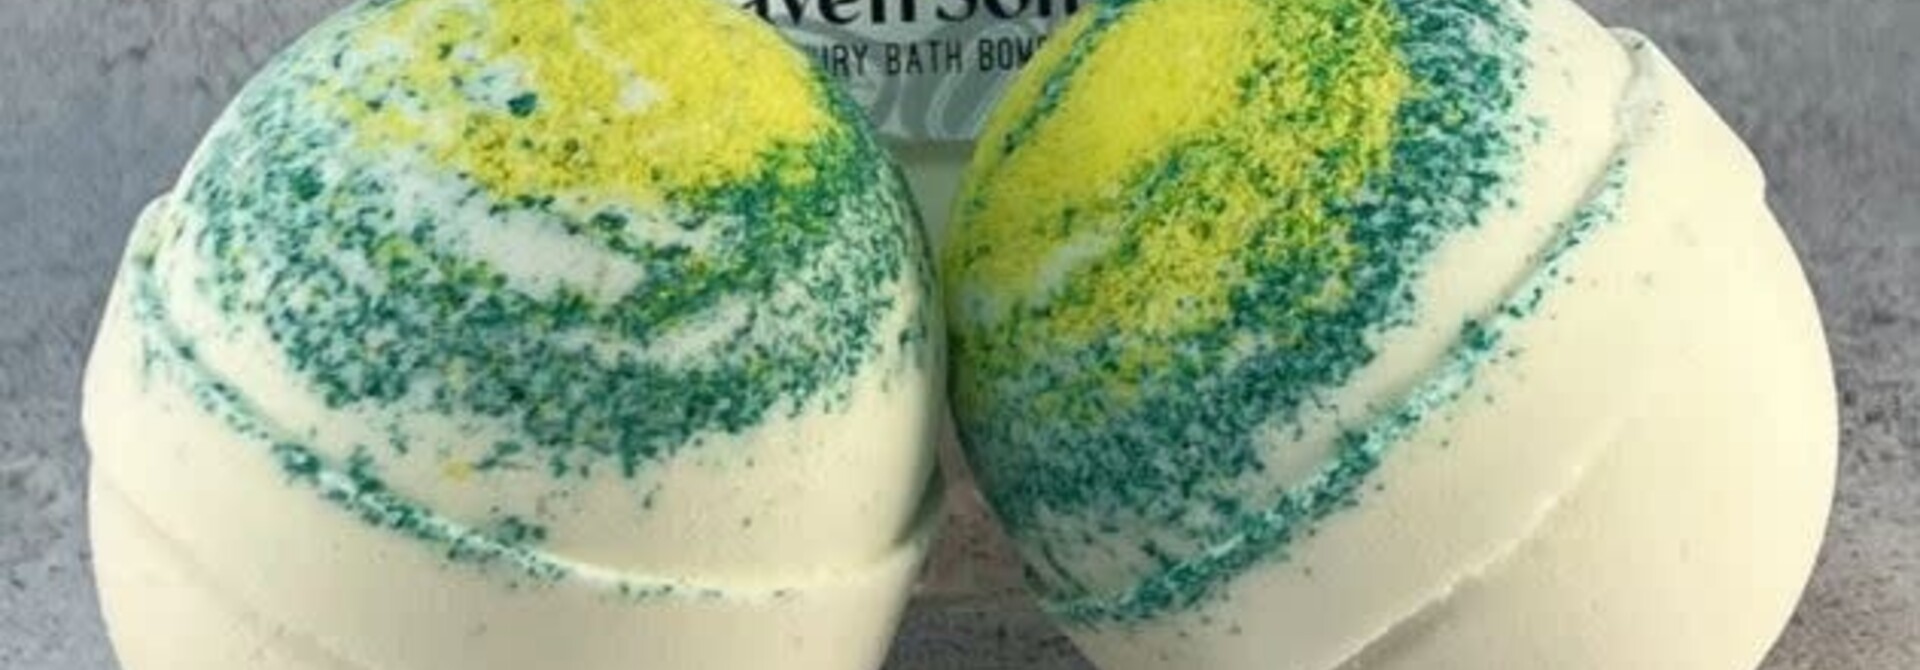 Raven Song Luxury Bath Bomb - Muscle & Joint Relief